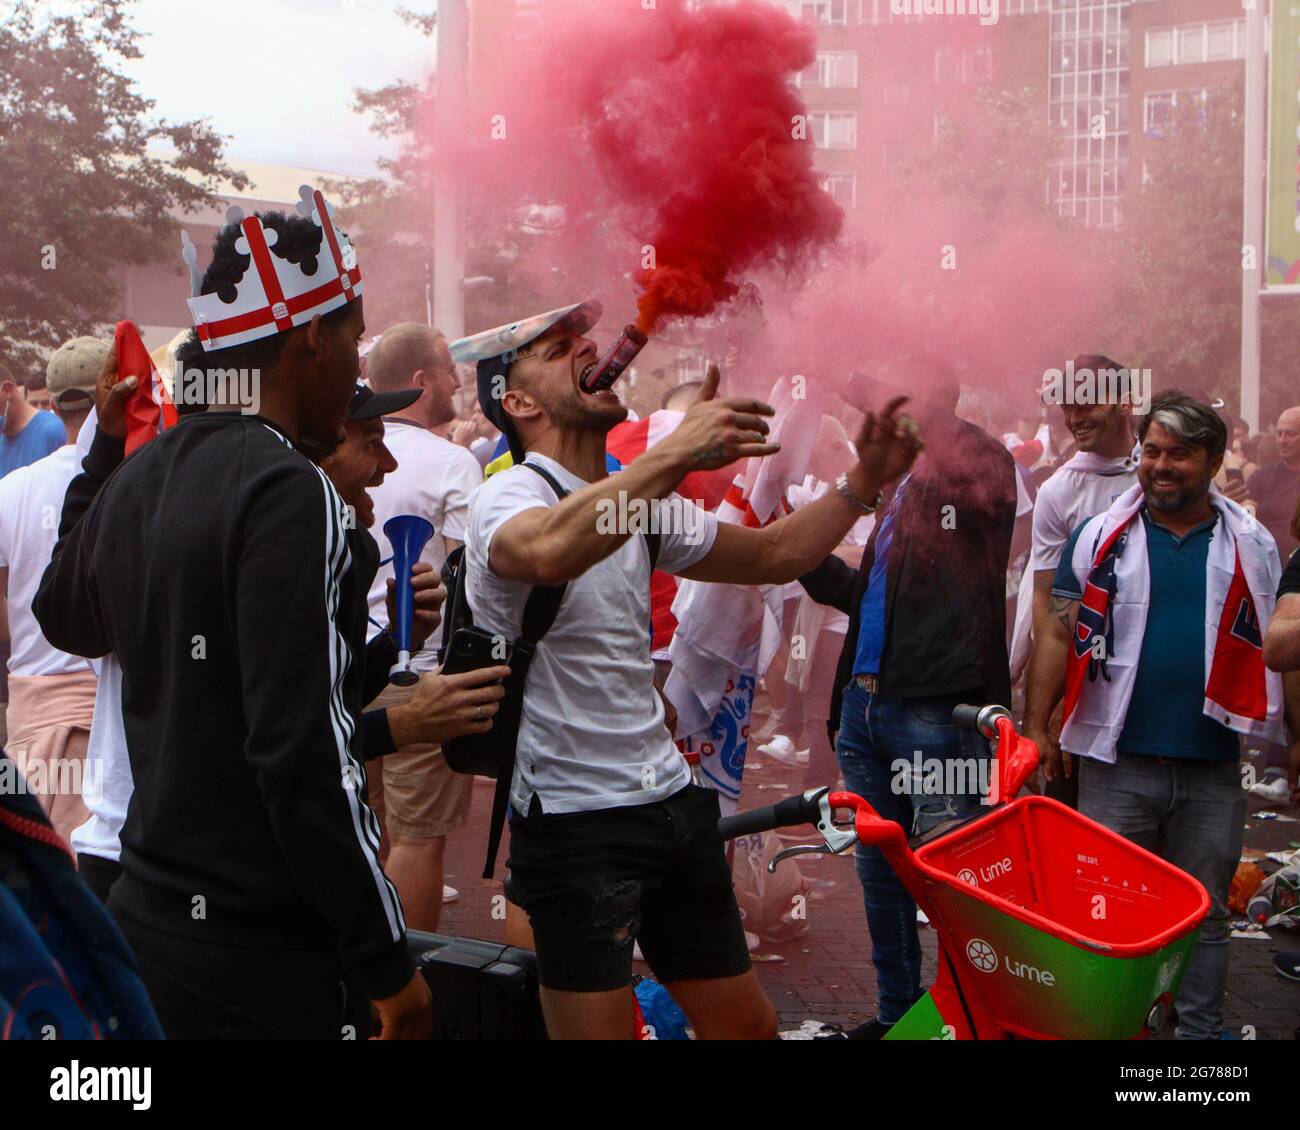 Wembley, London, UK. 12th July, 2021. An England supporter put a coloured flare in his mouth outside the Wembley Stadium prior to the England V Italy final at the Euro 2020. 11/07/2021, Marcin Riehs/Pathos Credit: One Up Top Editorial Images/Alamy Live News Stock Photo